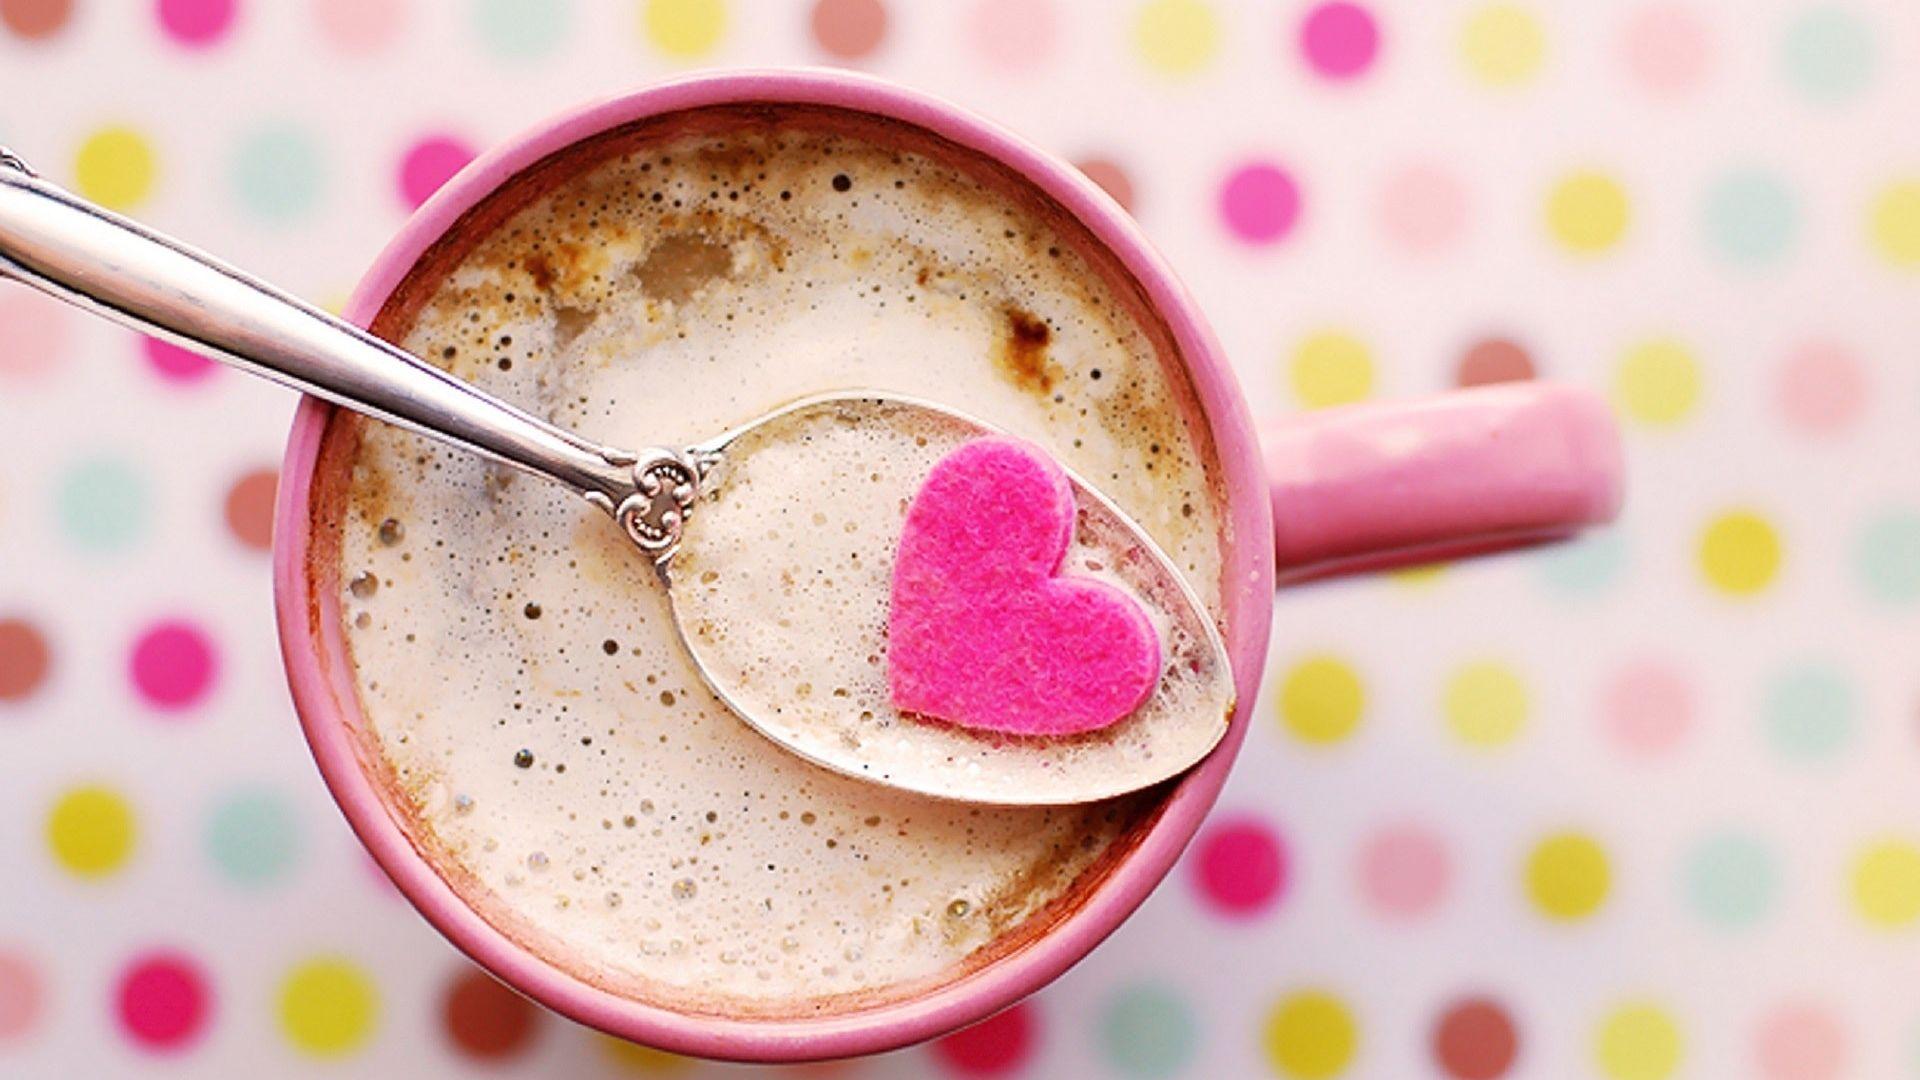 Heart Cutout on Spoon With Coffee Cup Wallpaper